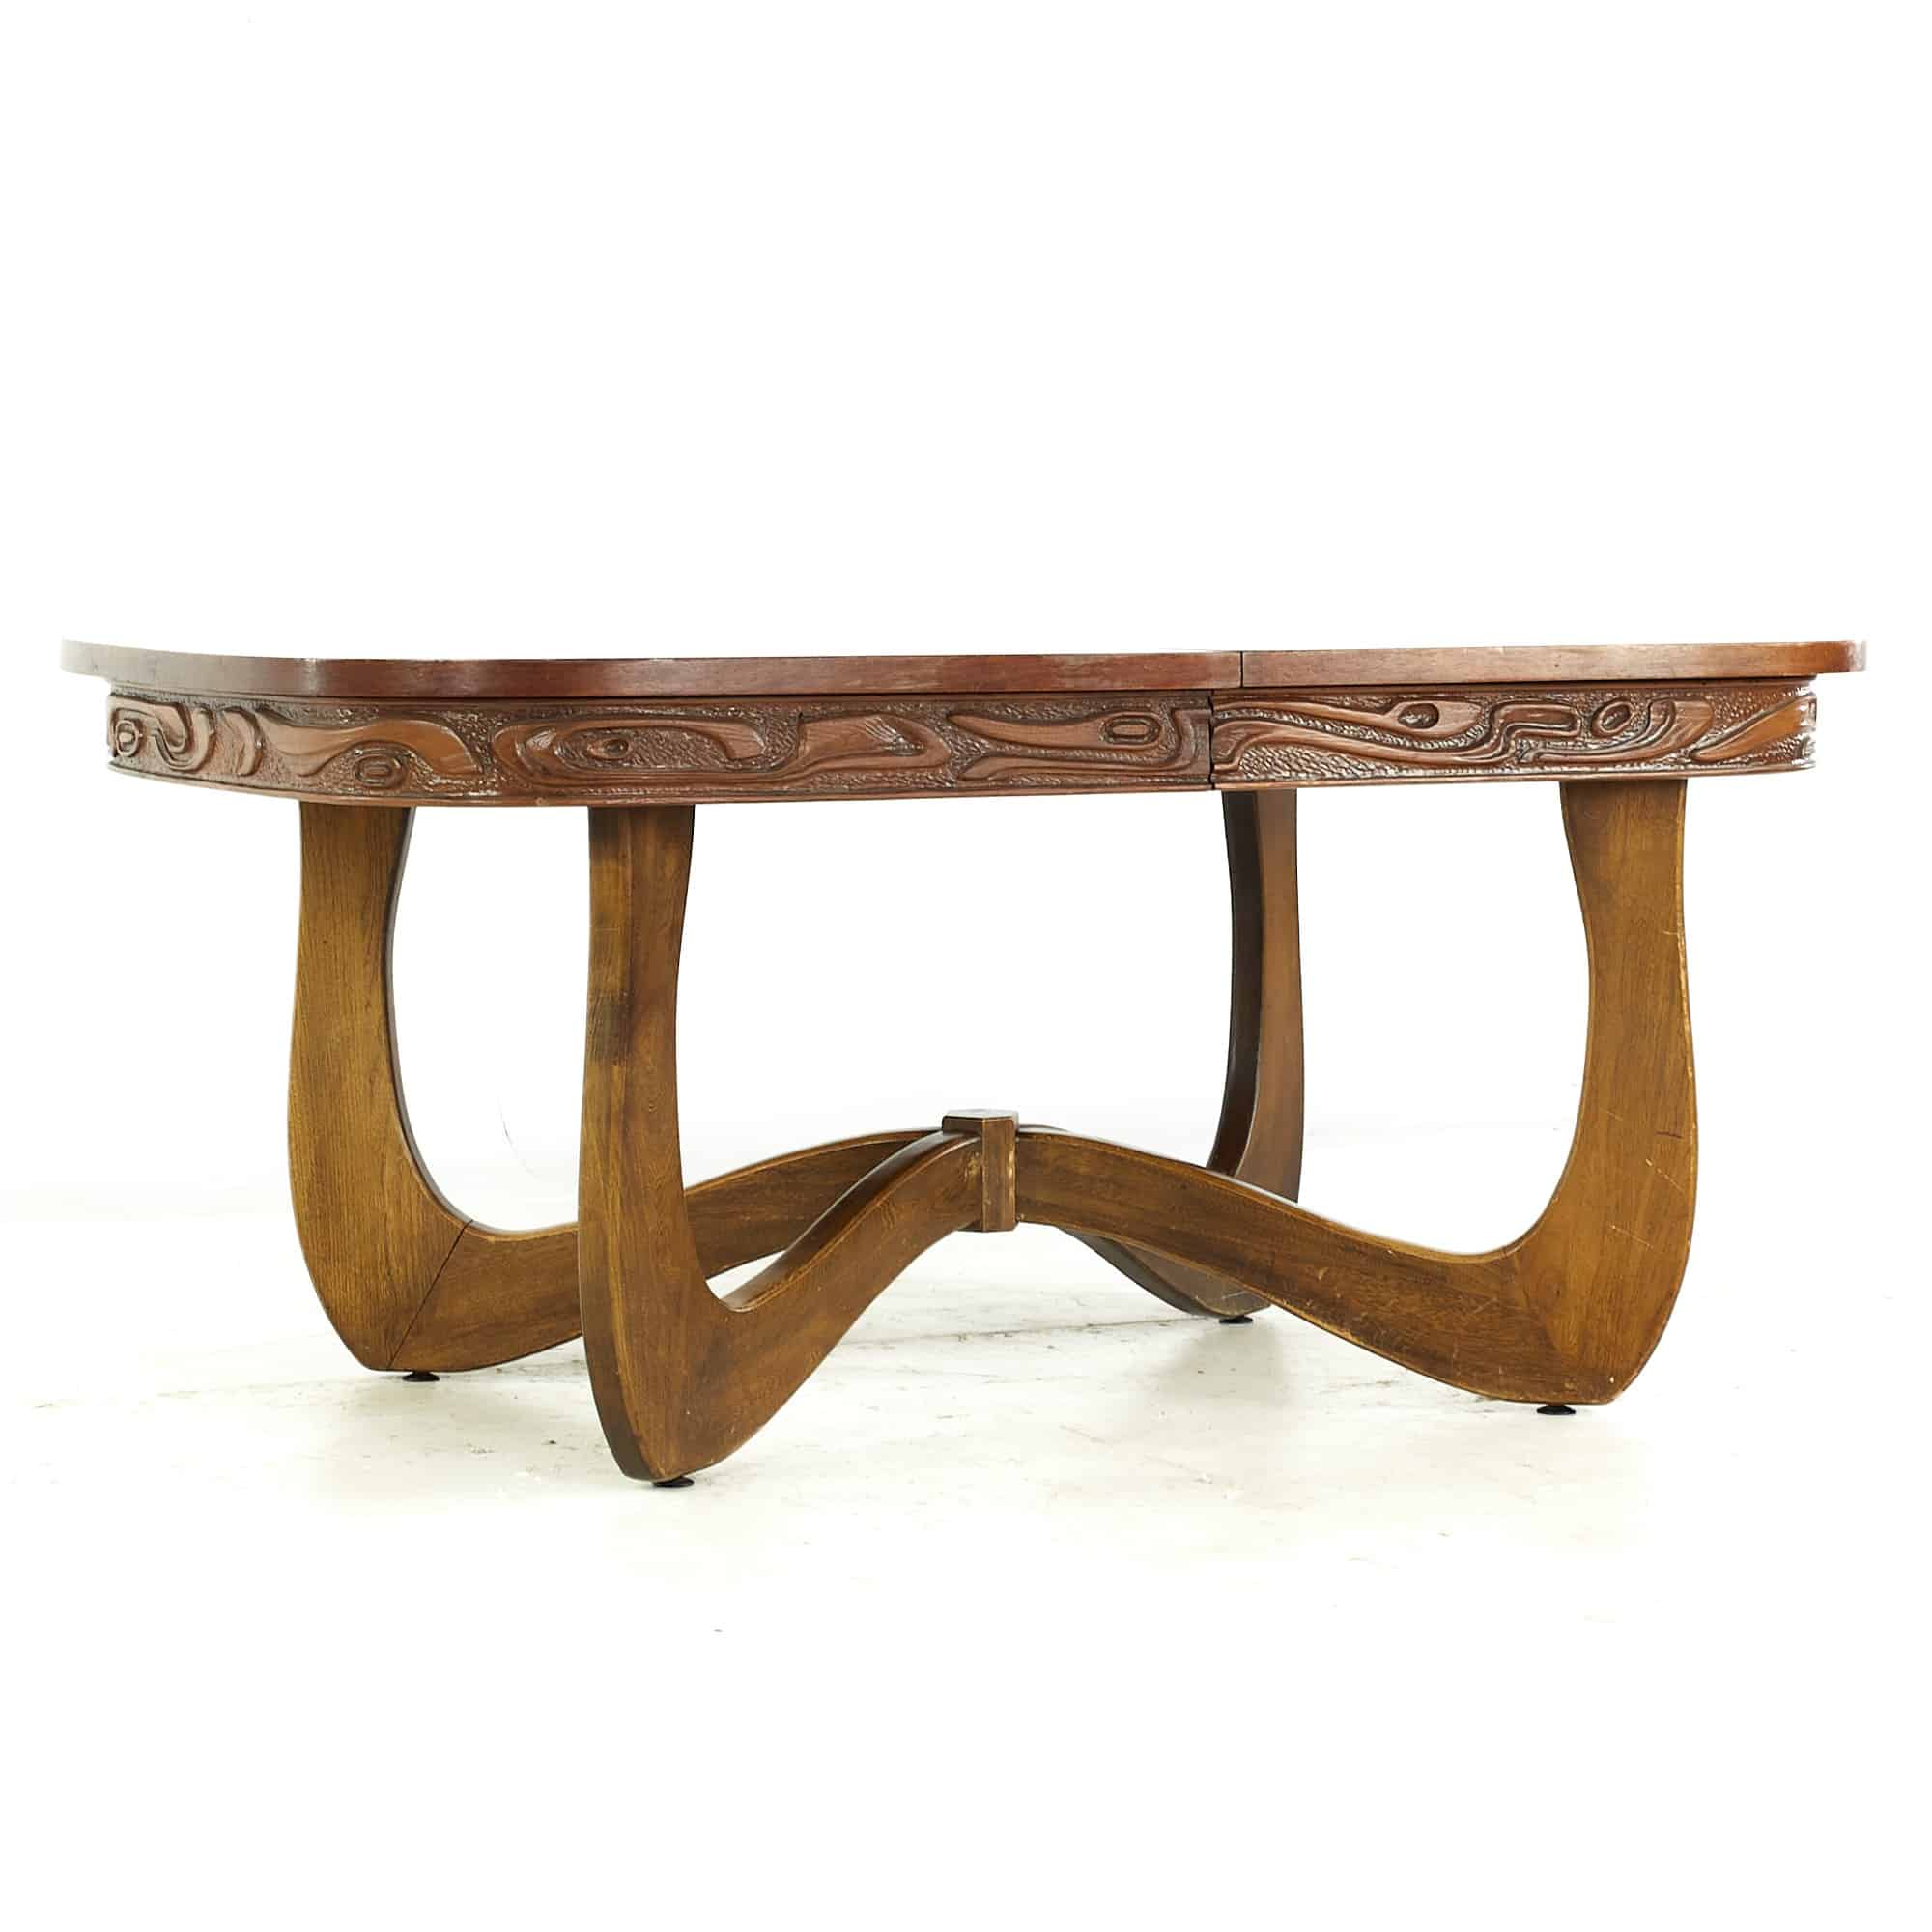 Witco Style Pulaski Oceanic Mid Century Dining Table with 1 Leaf